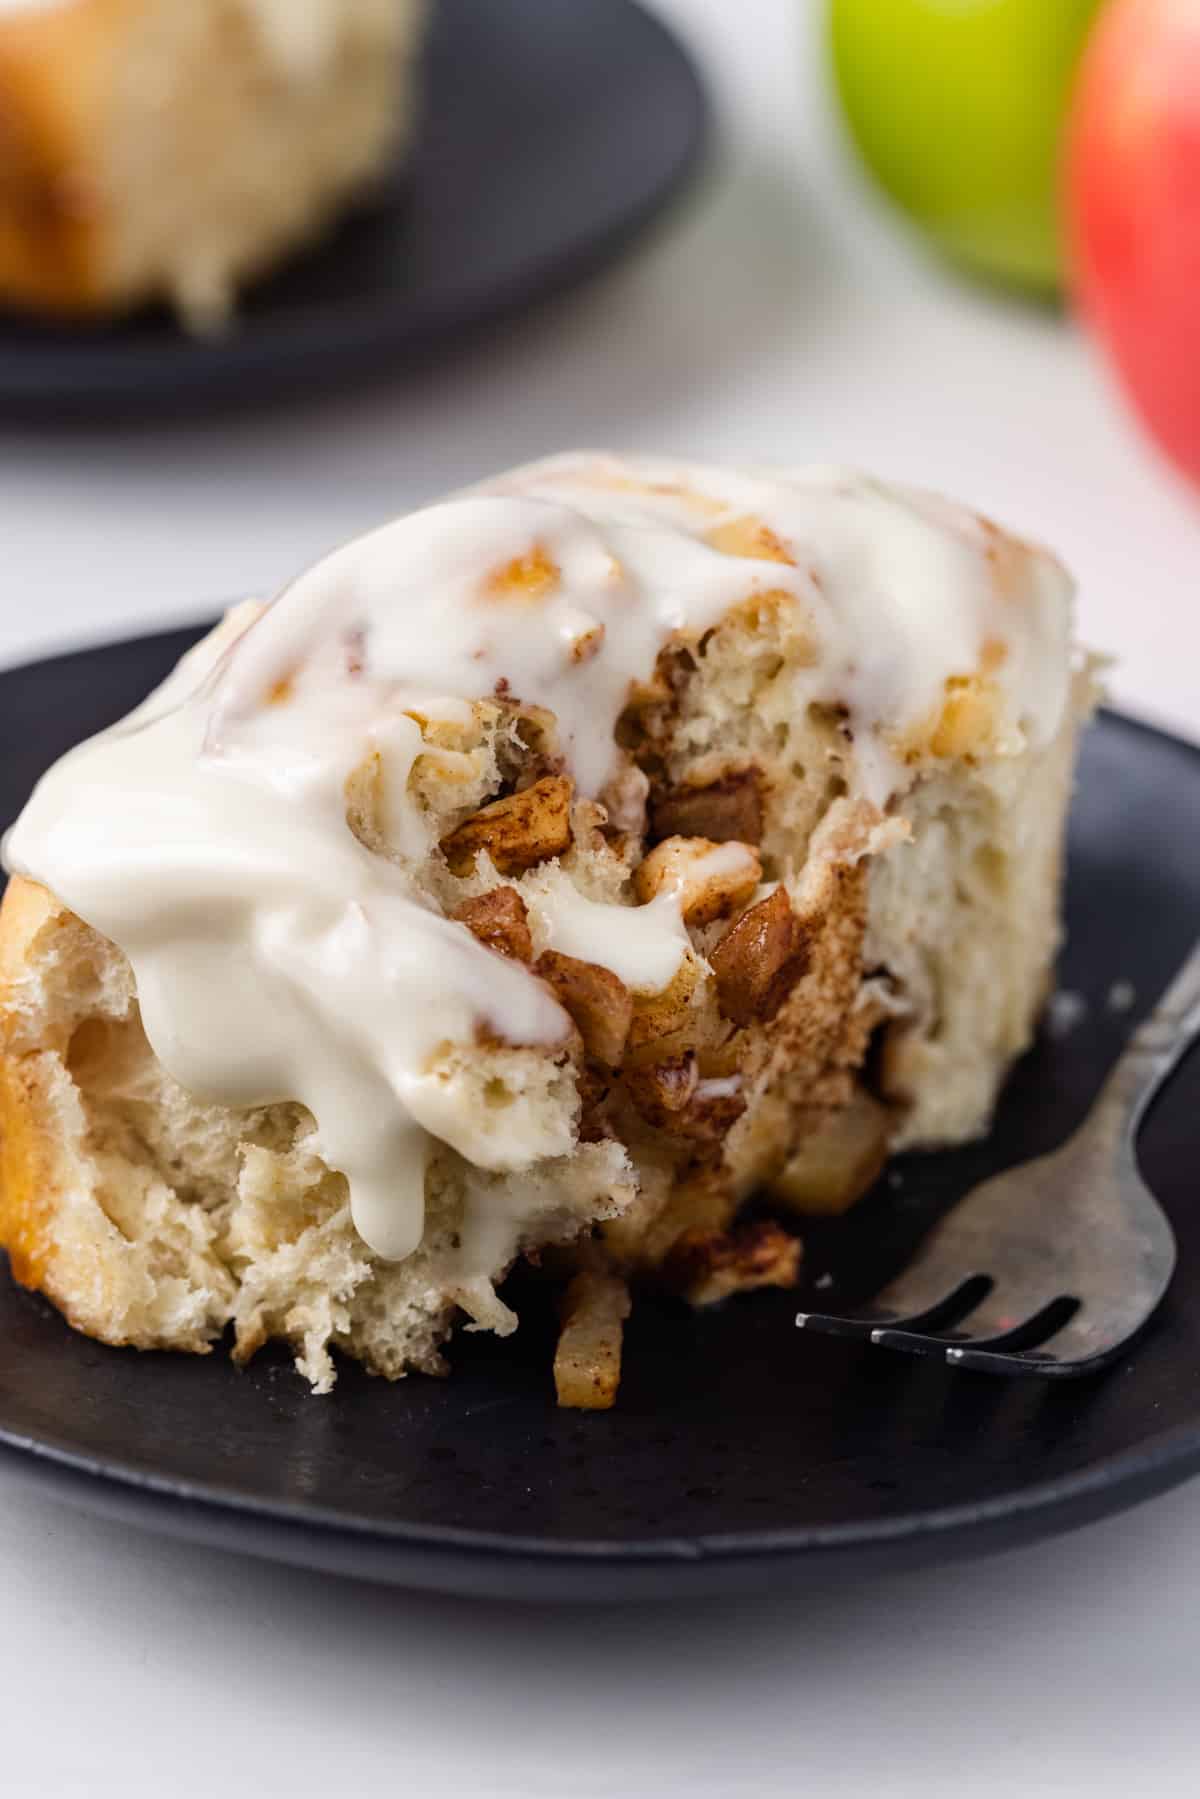 Freshly baked glazed apple cinnamon rolls on a plate with a fork